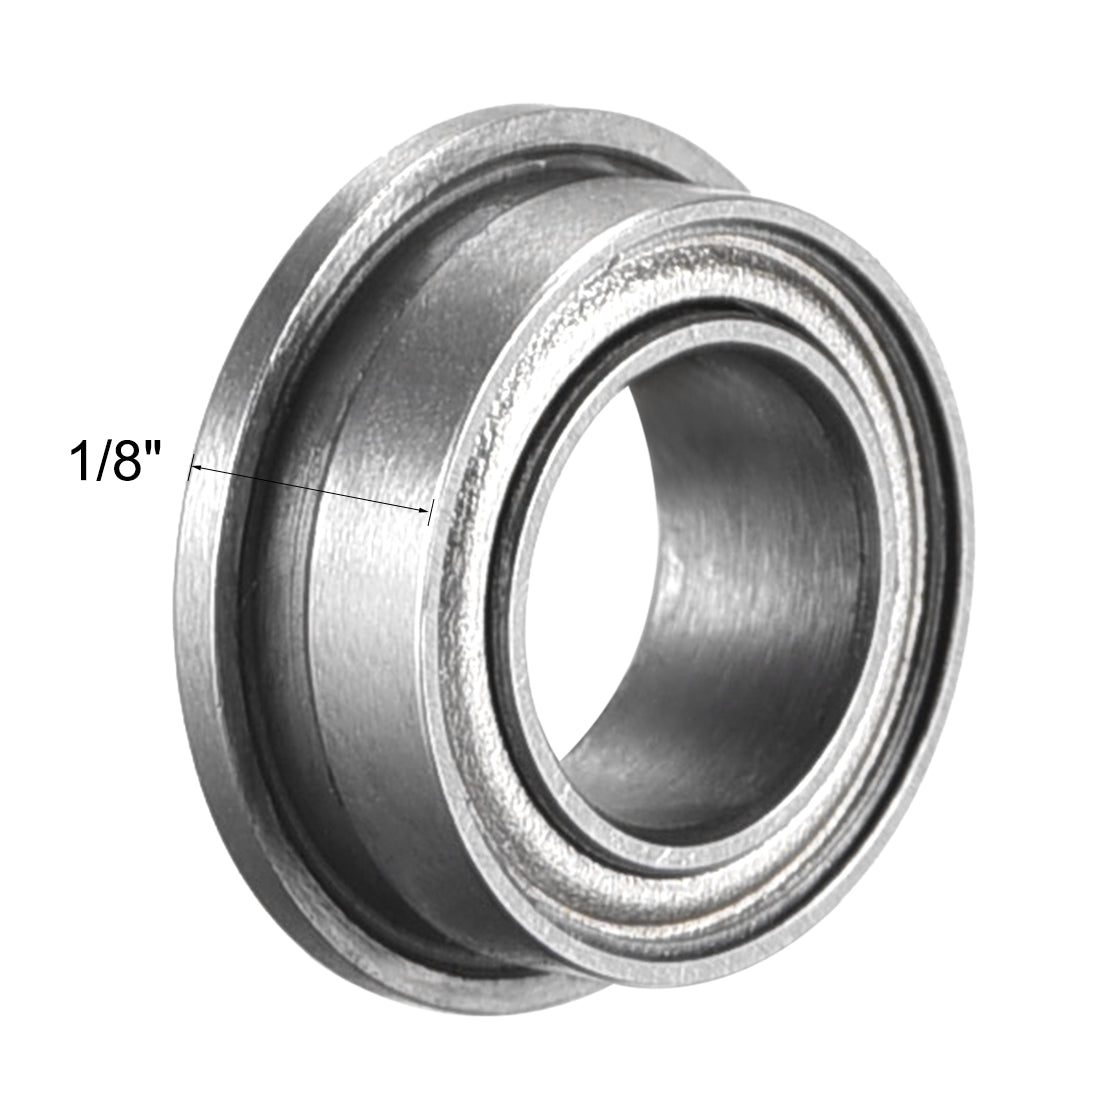 uxcell Uxcell FR156ZZ Flange Ball Bearing 3/16mmx5/16mmx1/8 Double Shielded Bearings 10 Pcs